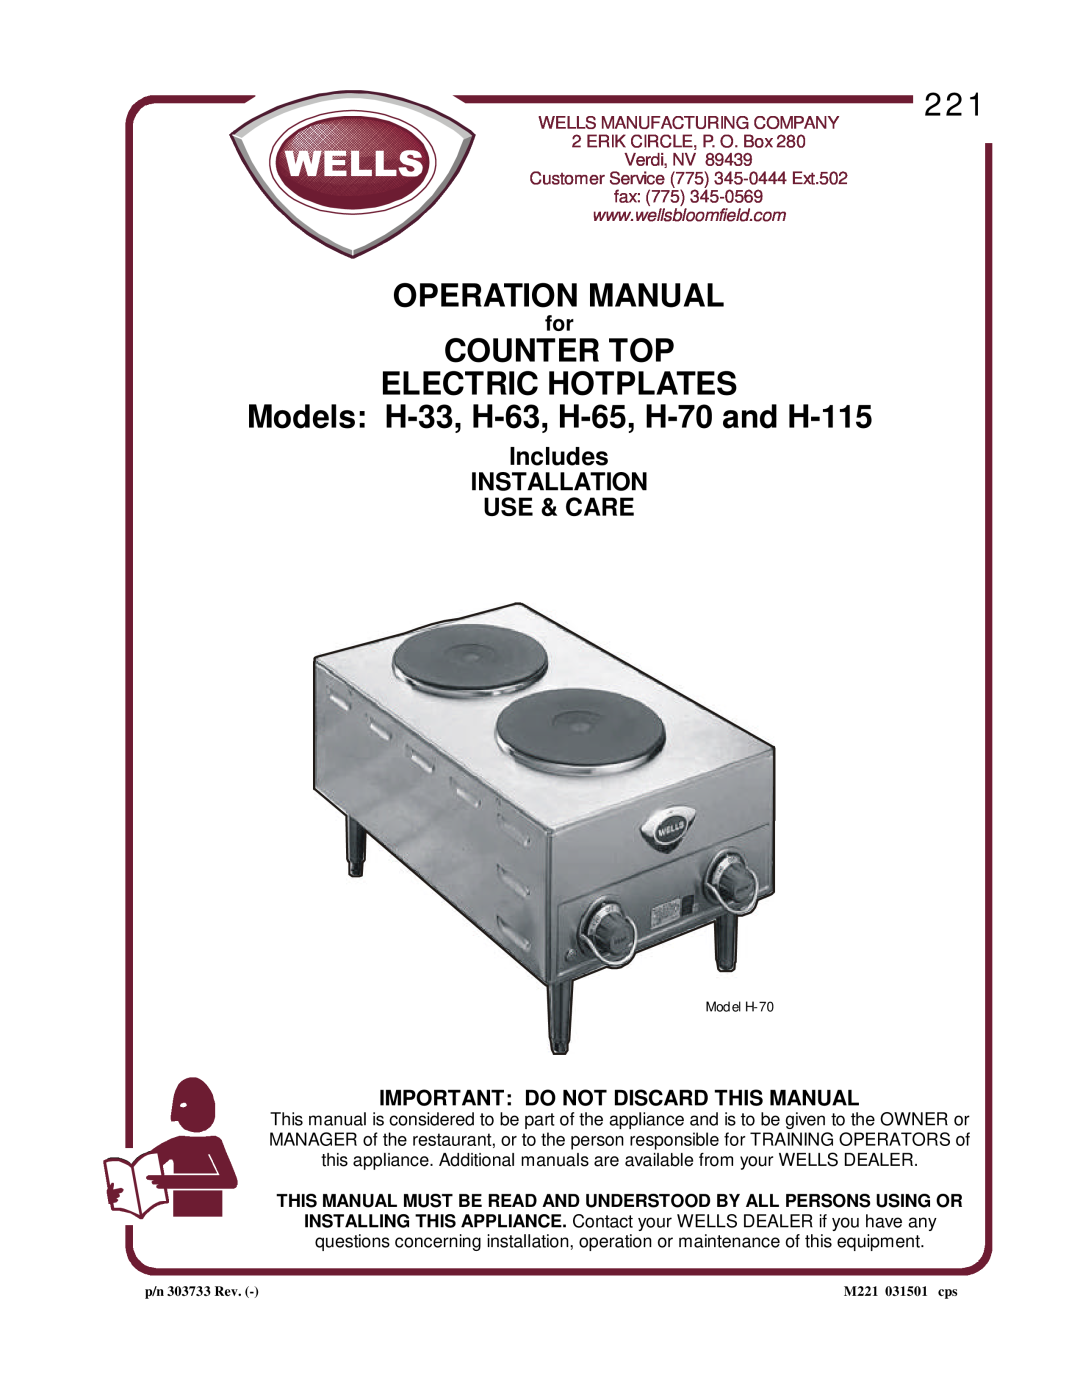 Wells H-70 operation manual Includes INSTALLATION USE & CARE, Counter Top Electric Hotplates, Wells Manufacturing Company 